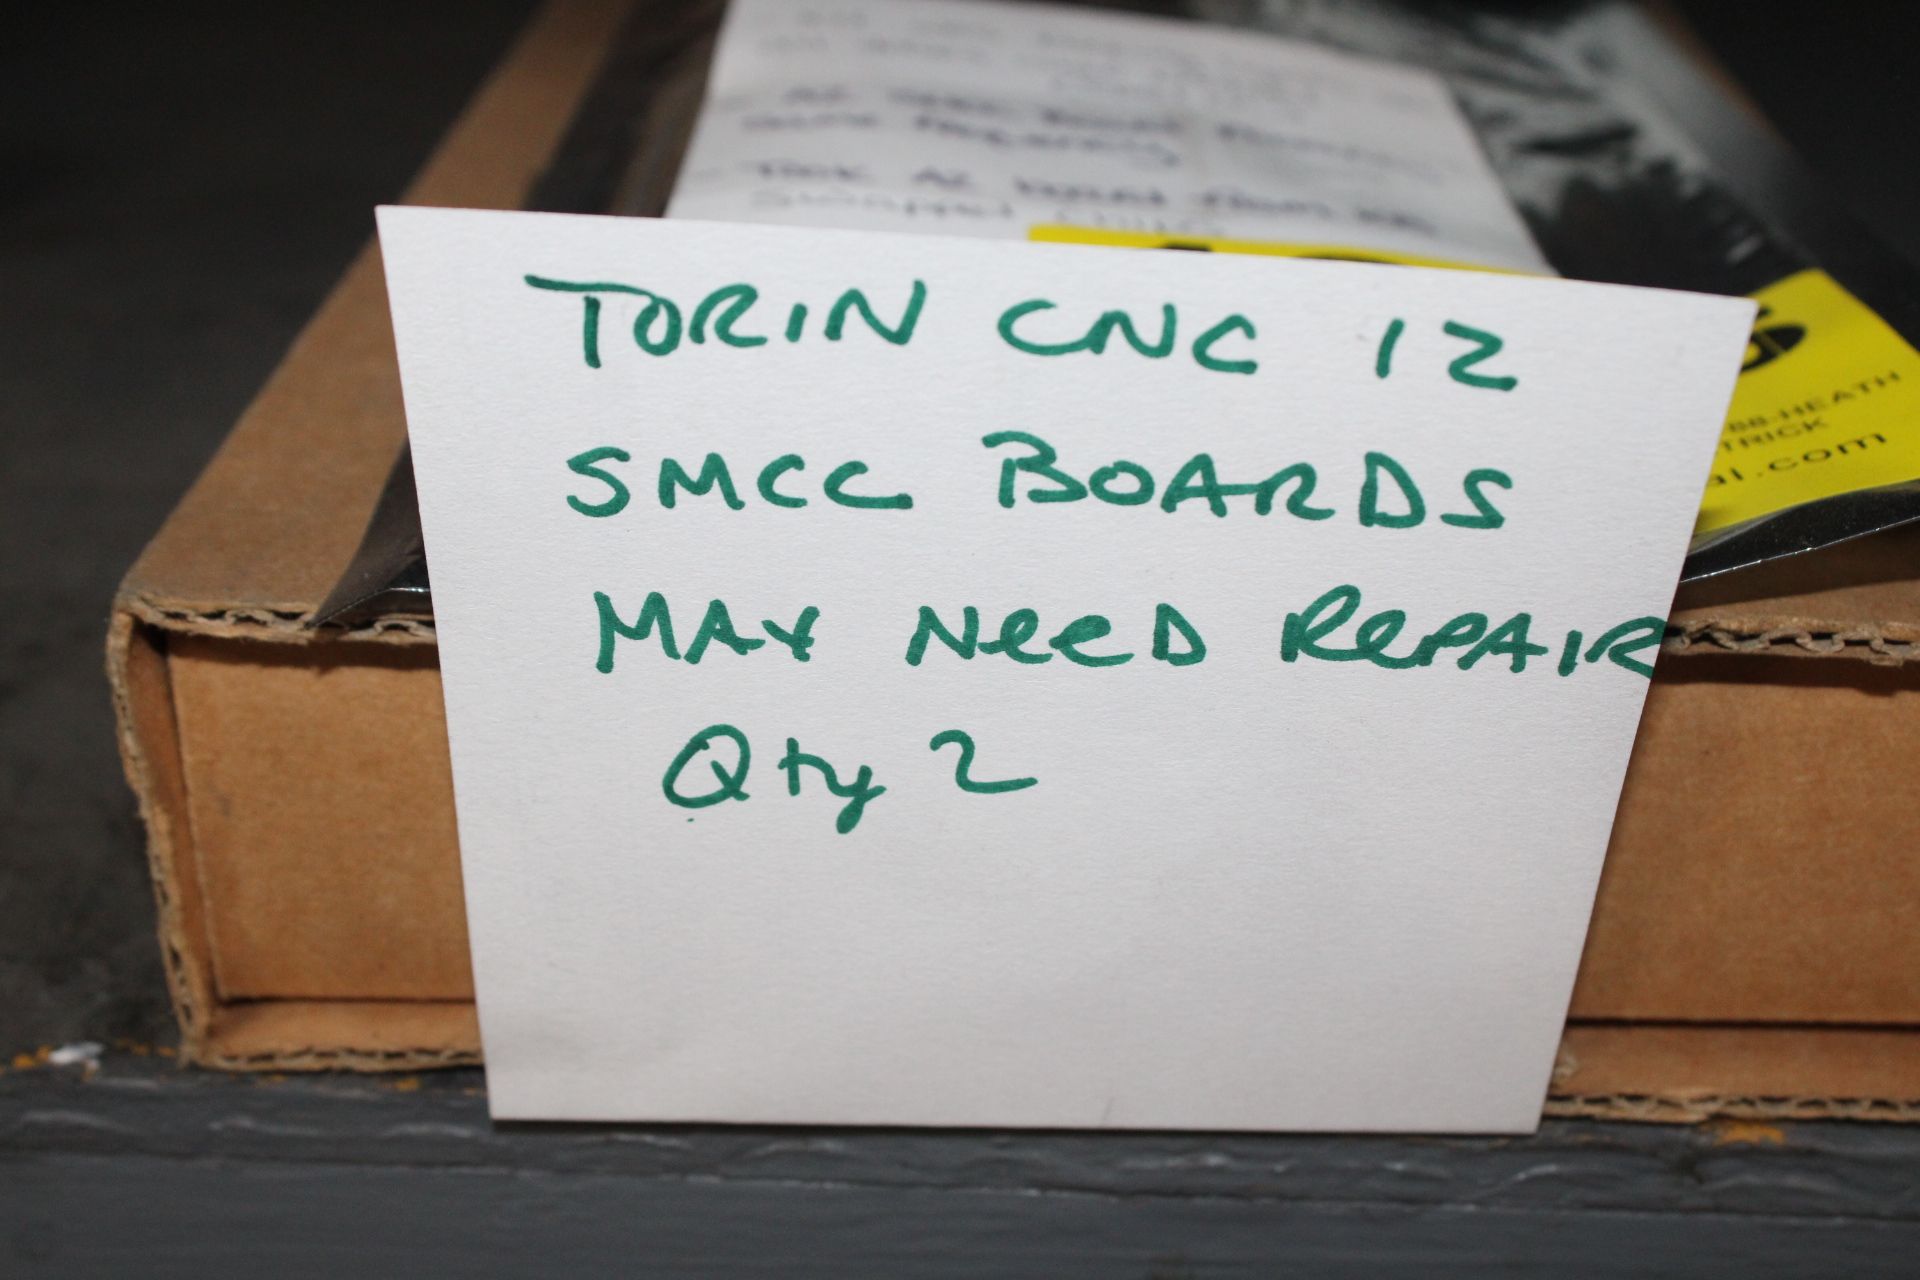 (2) TORIN CNC 11 SMCC BOARDS (** CONDITION UNKOWN, MAY NEED REPAIR **) - Image 2 of 3